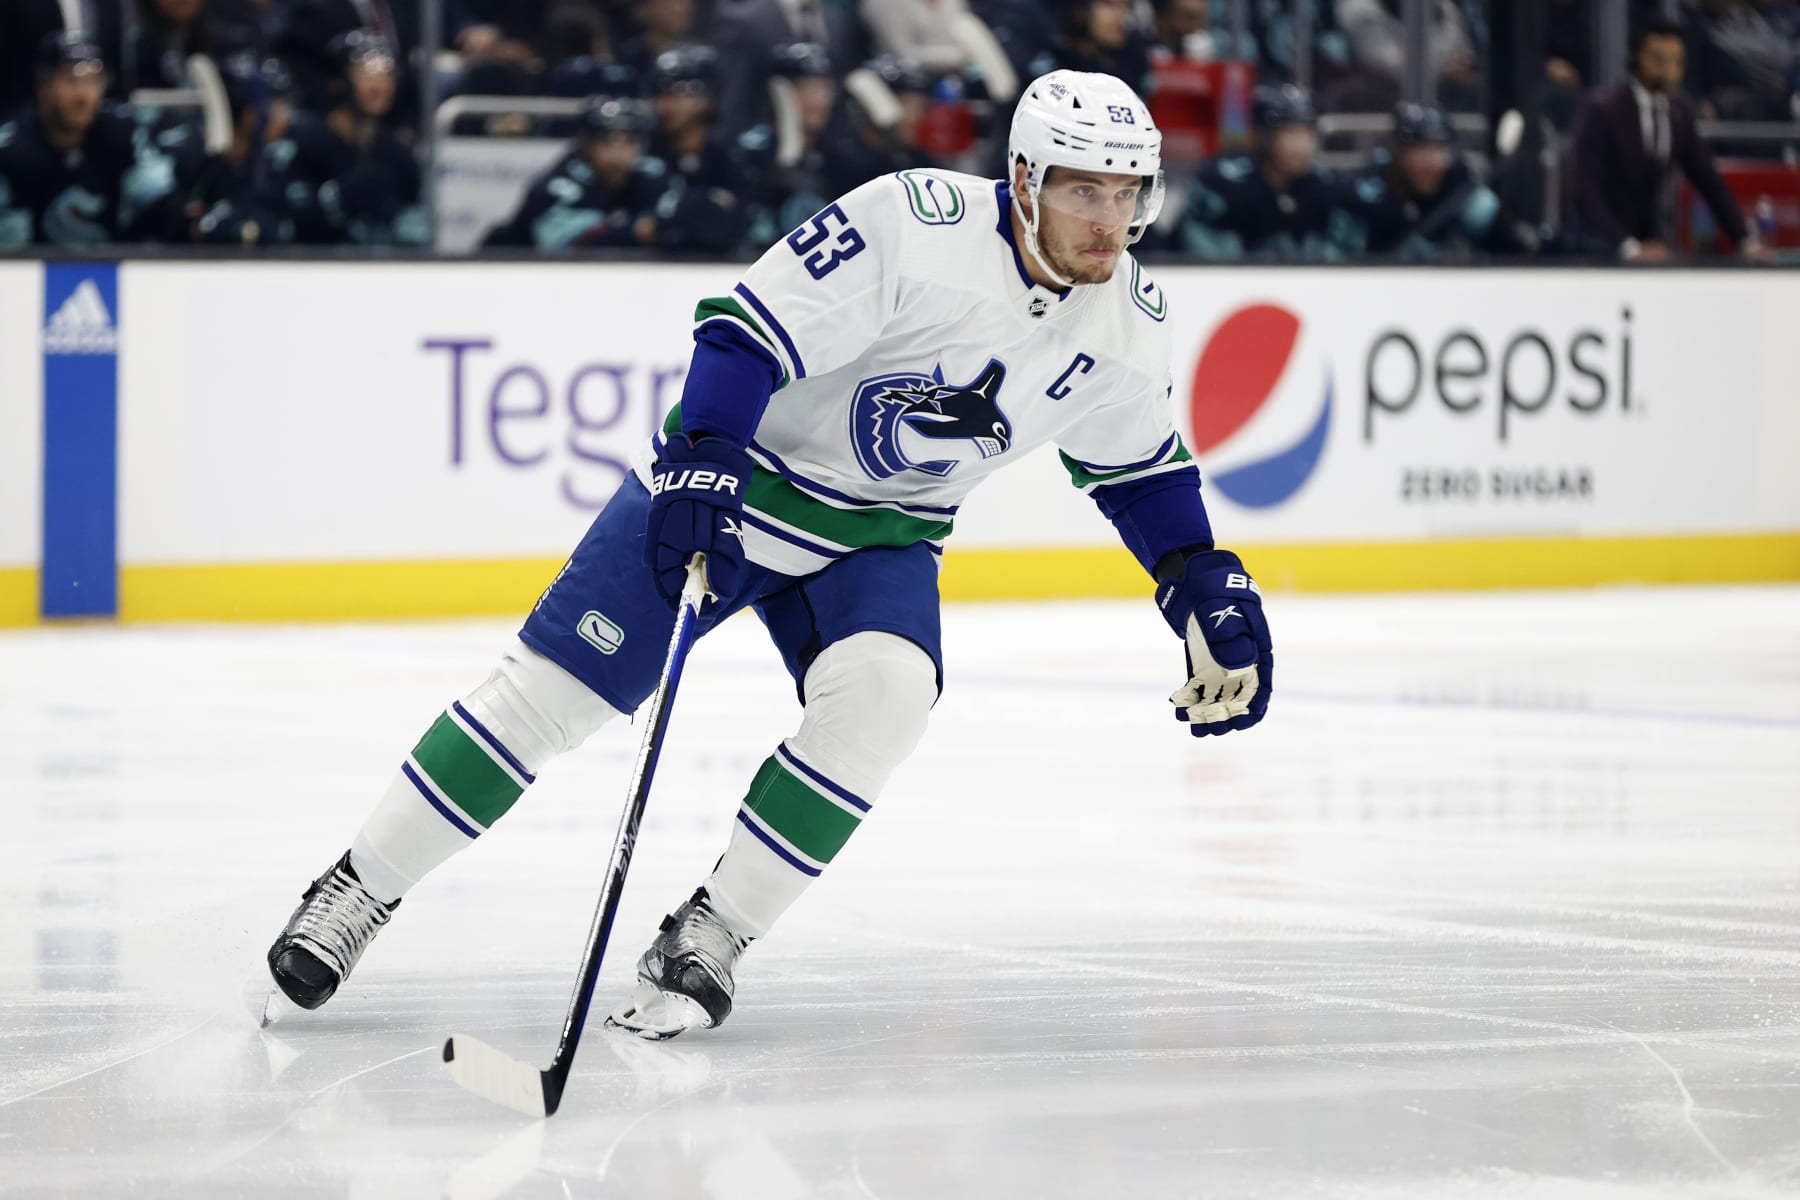 Report: Canucks D Ethan Bear to have shoulder surgery